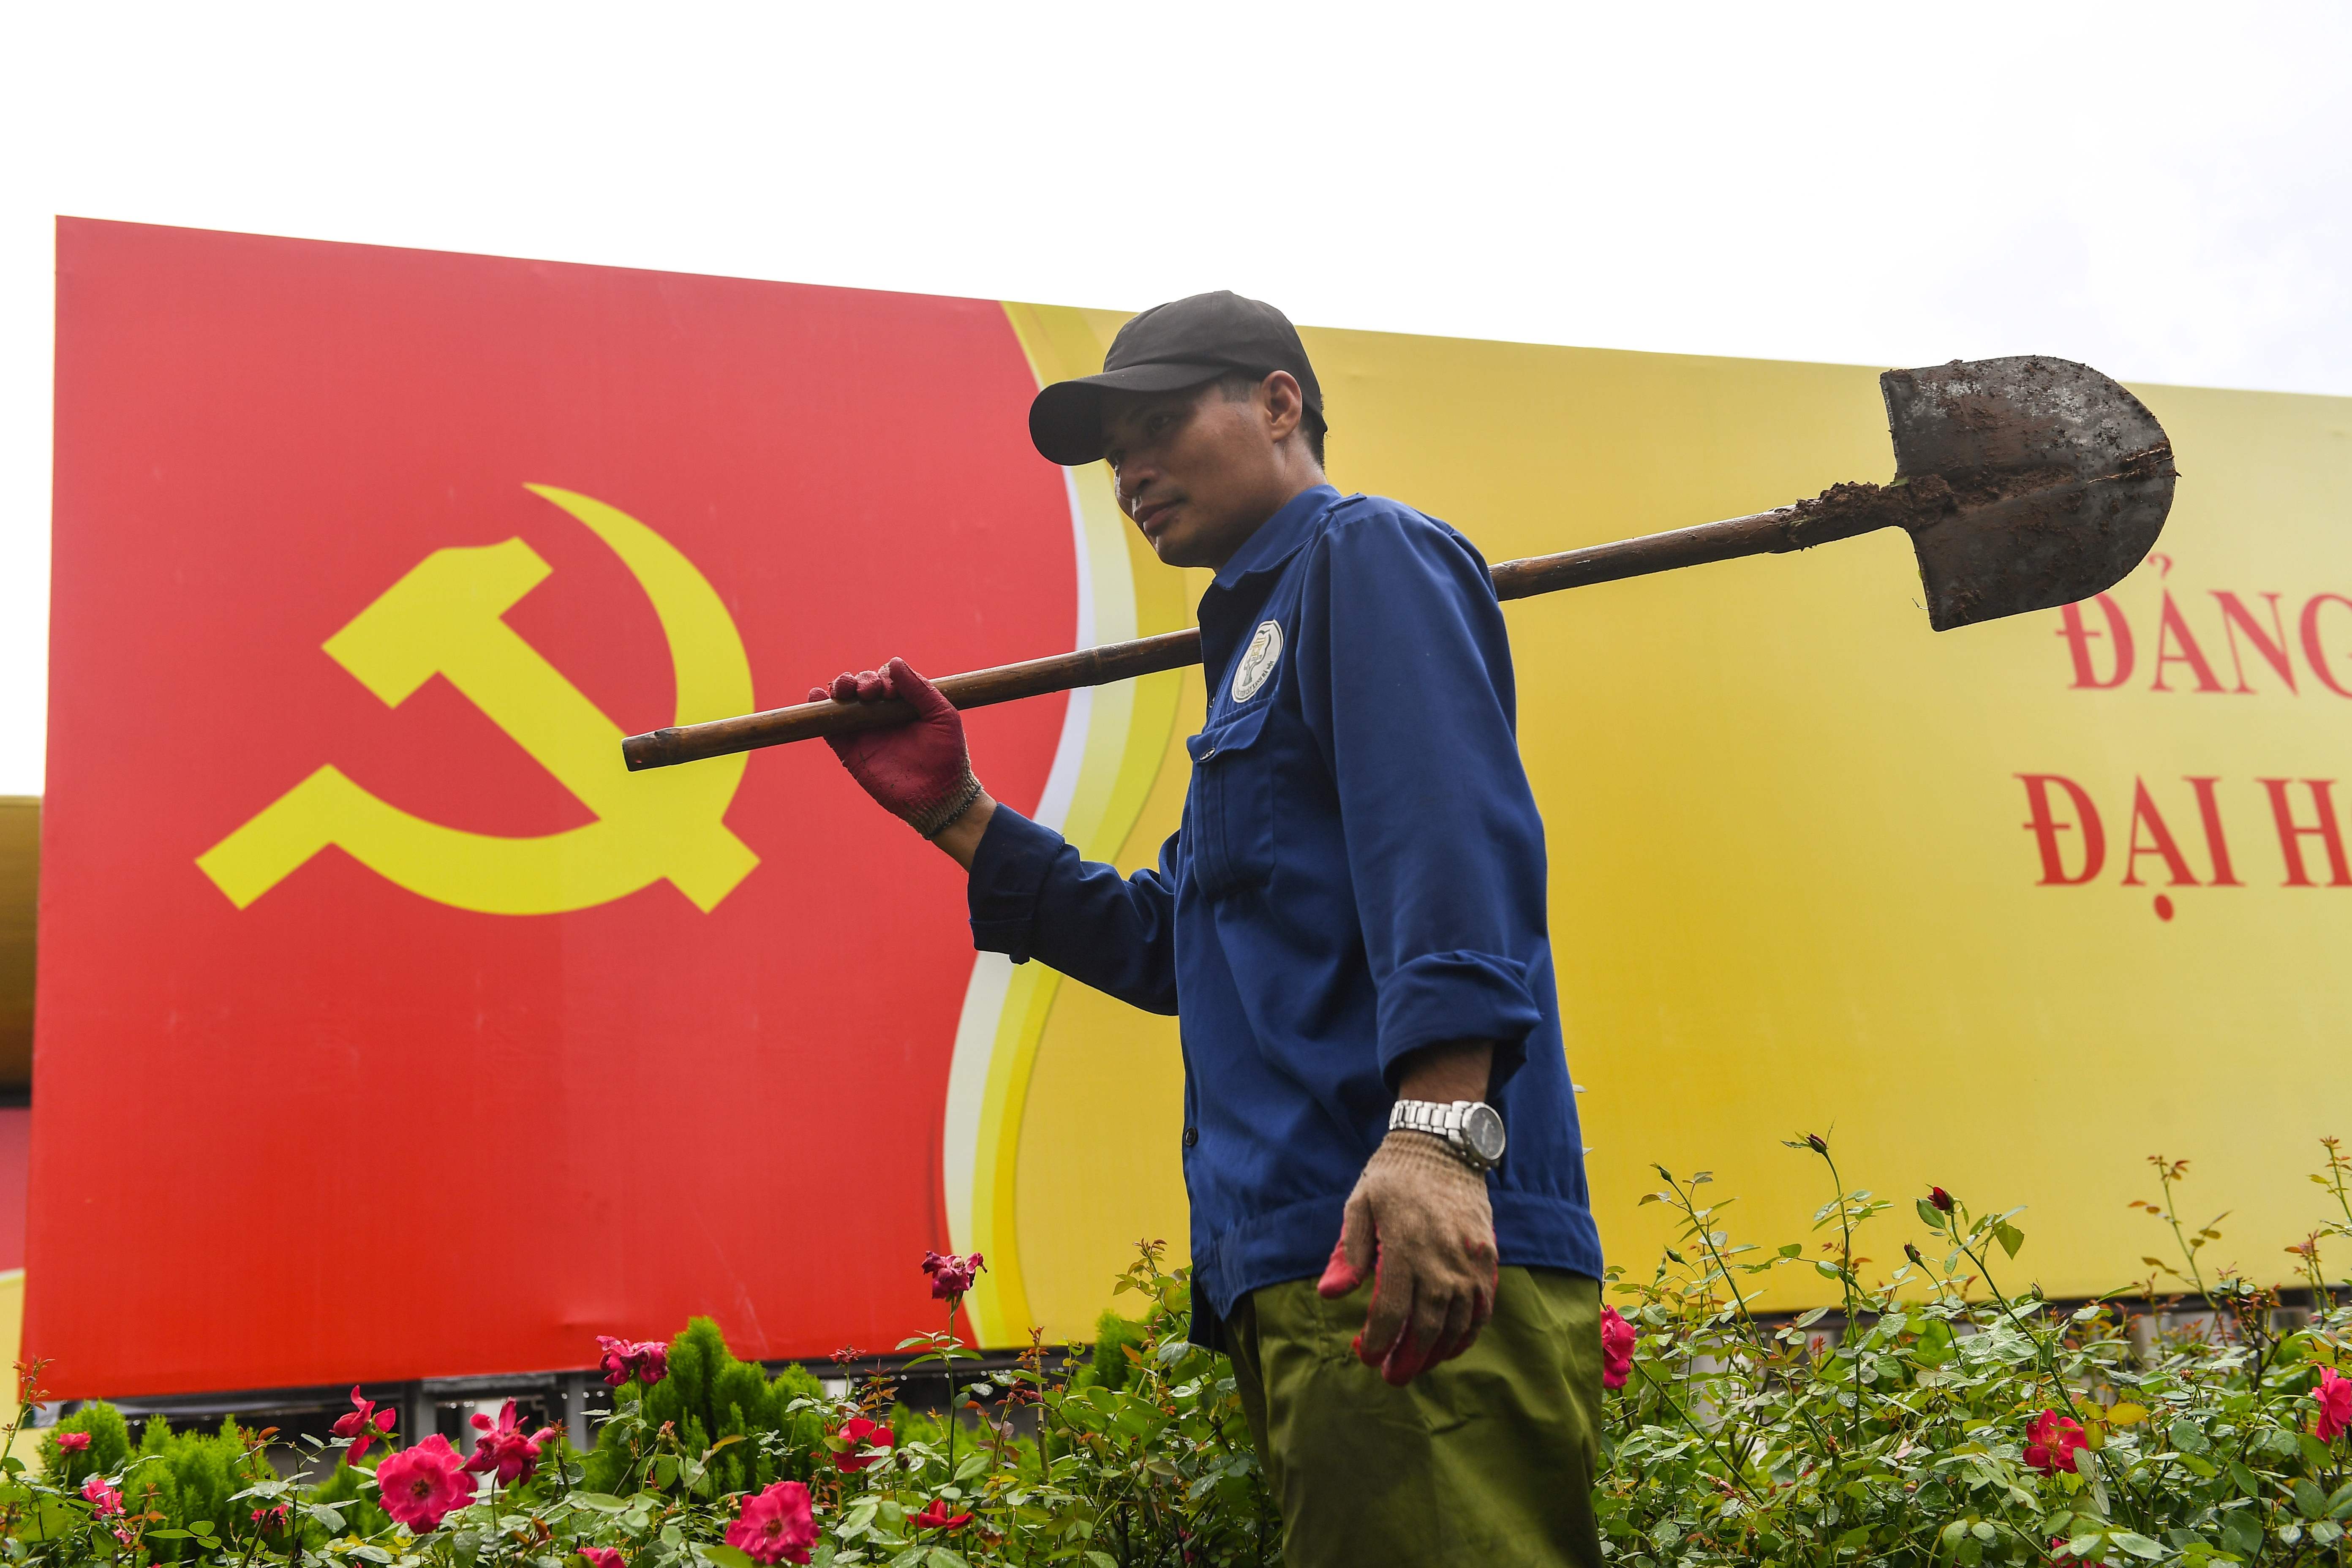 Vietnam’s ruling Communist Party has recently stepped up its crackdown on activists ahead of a key party congress in January